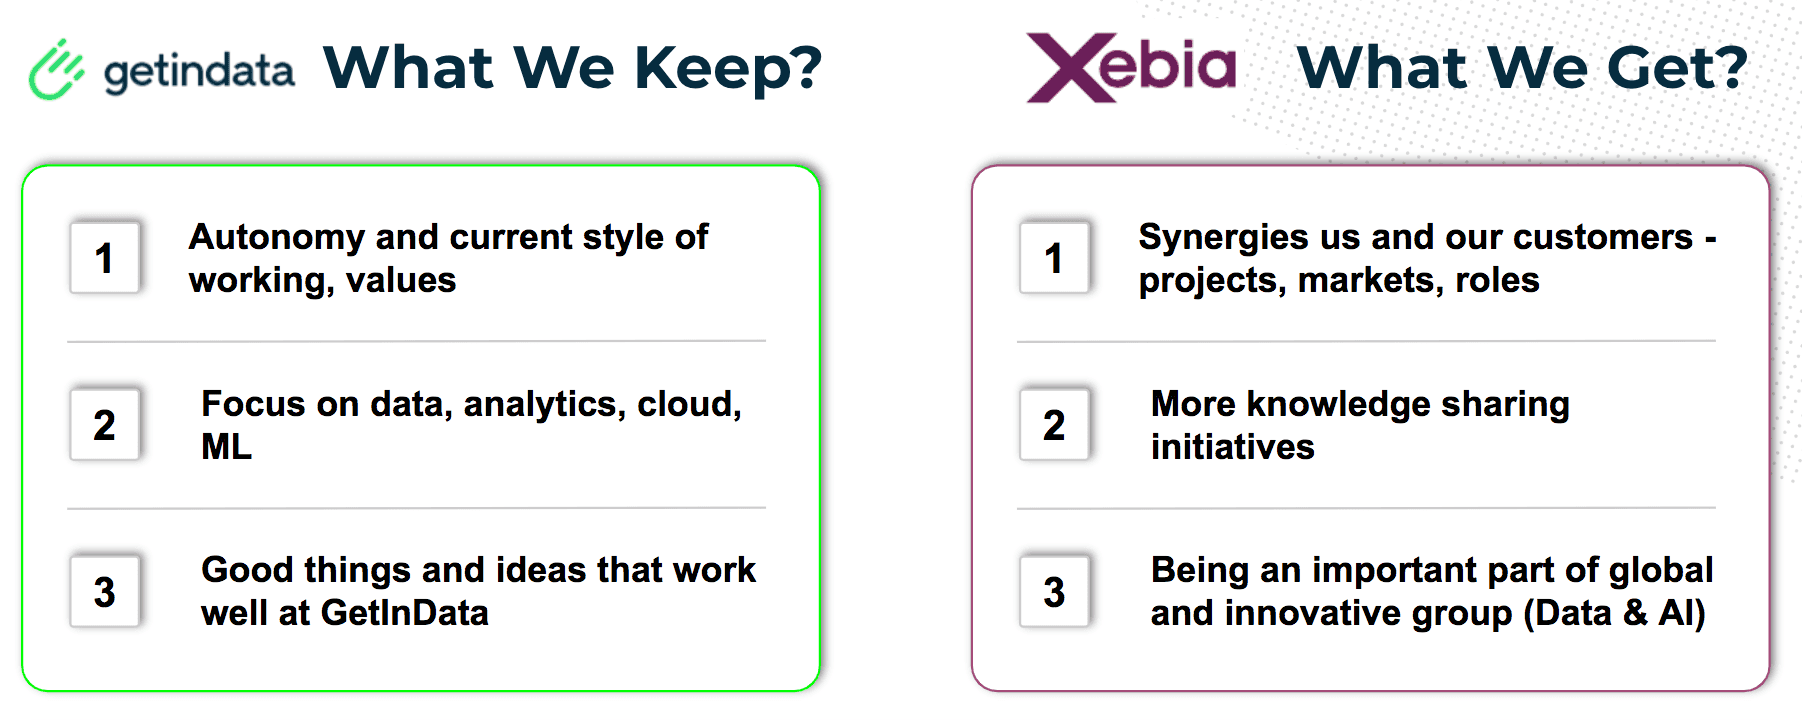 getindata-values-xebia.png